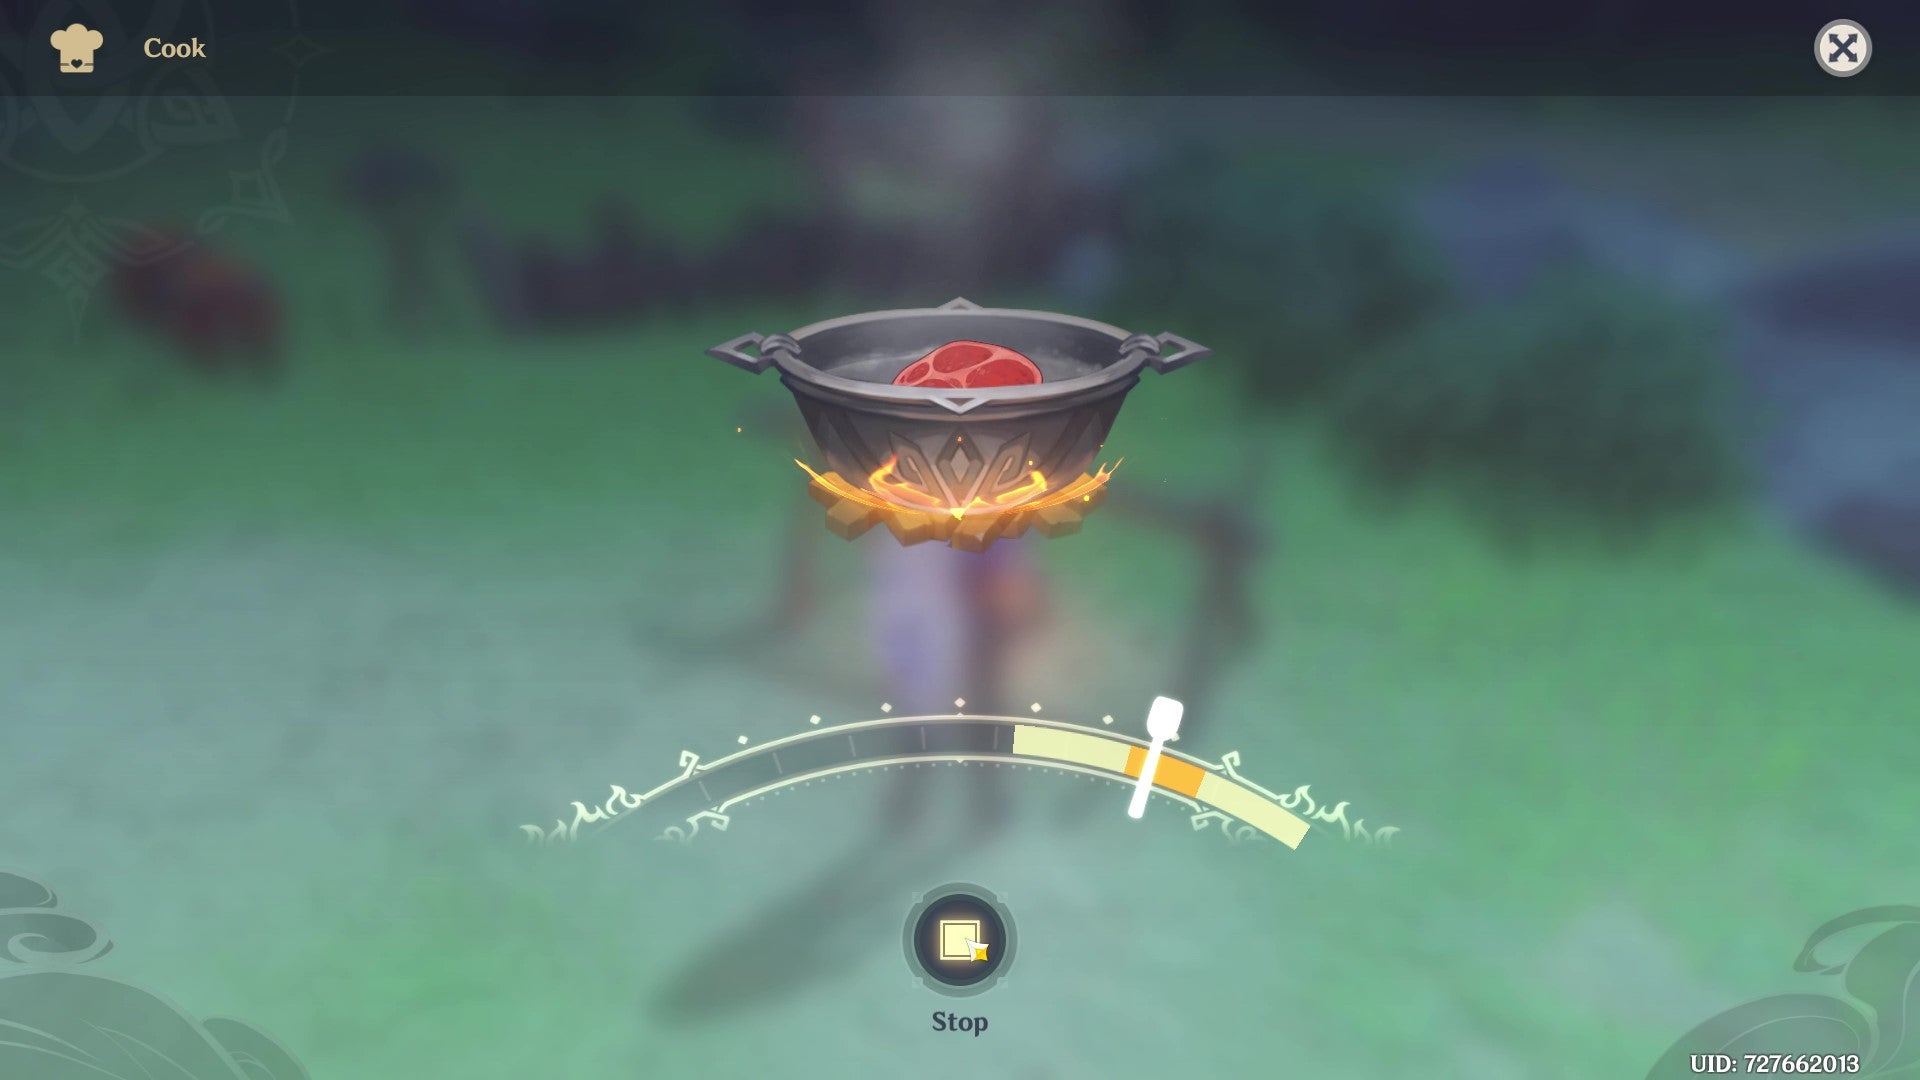 The Genshin Impact cooking minigame, showing a cooking quality metre beneath a bowl of food being cooked over a fire.